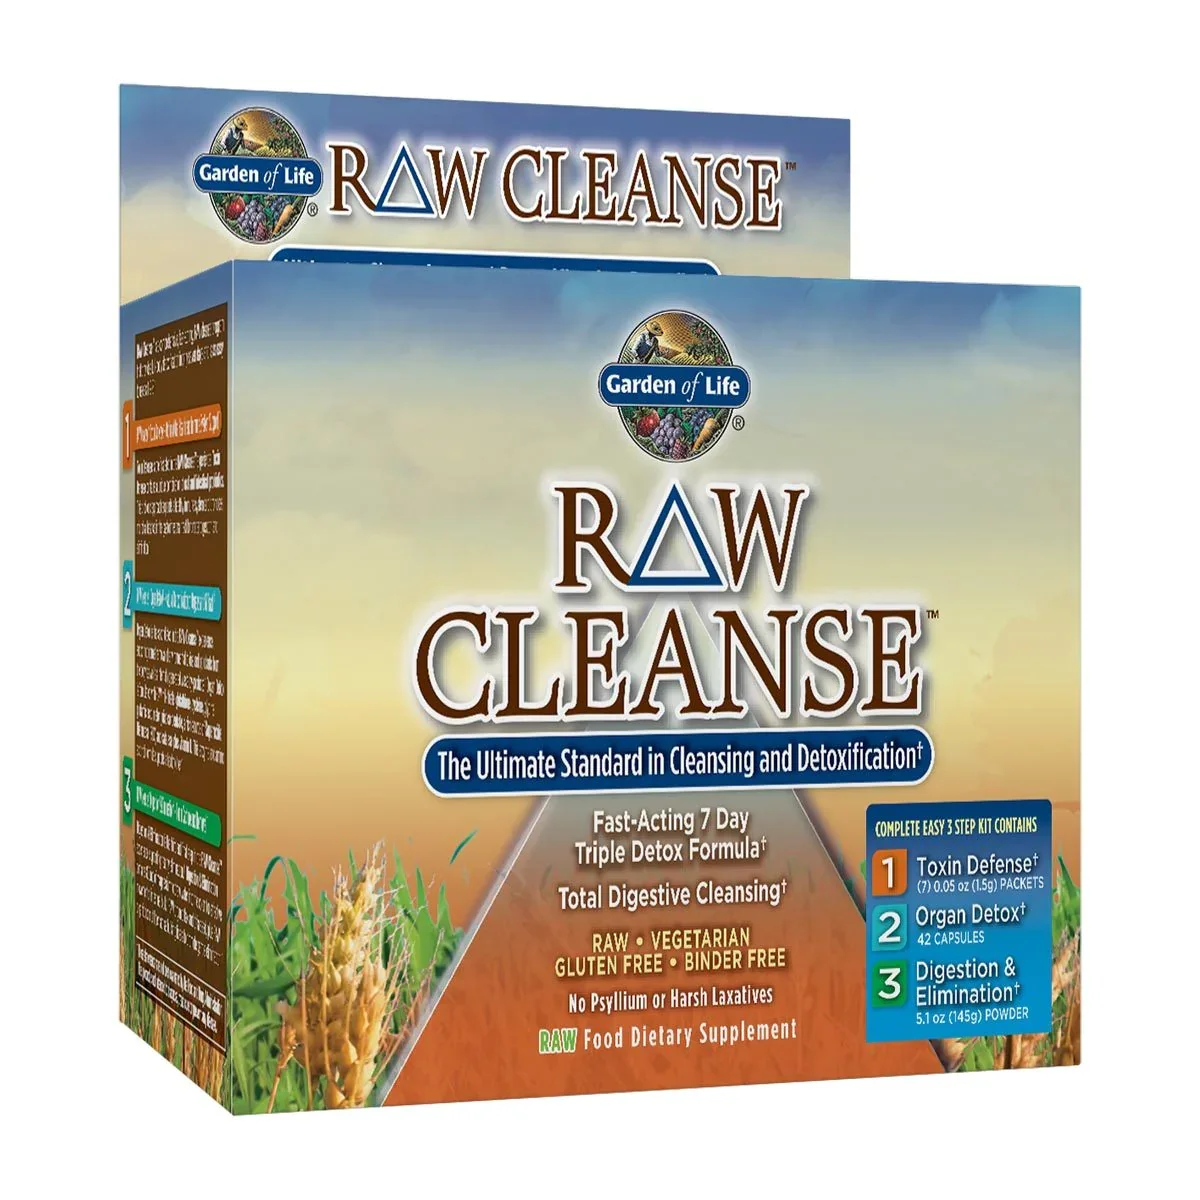 Image of Garden of Life Raw Cleanse Fast-Acting 7 Day Triple Detox Formula